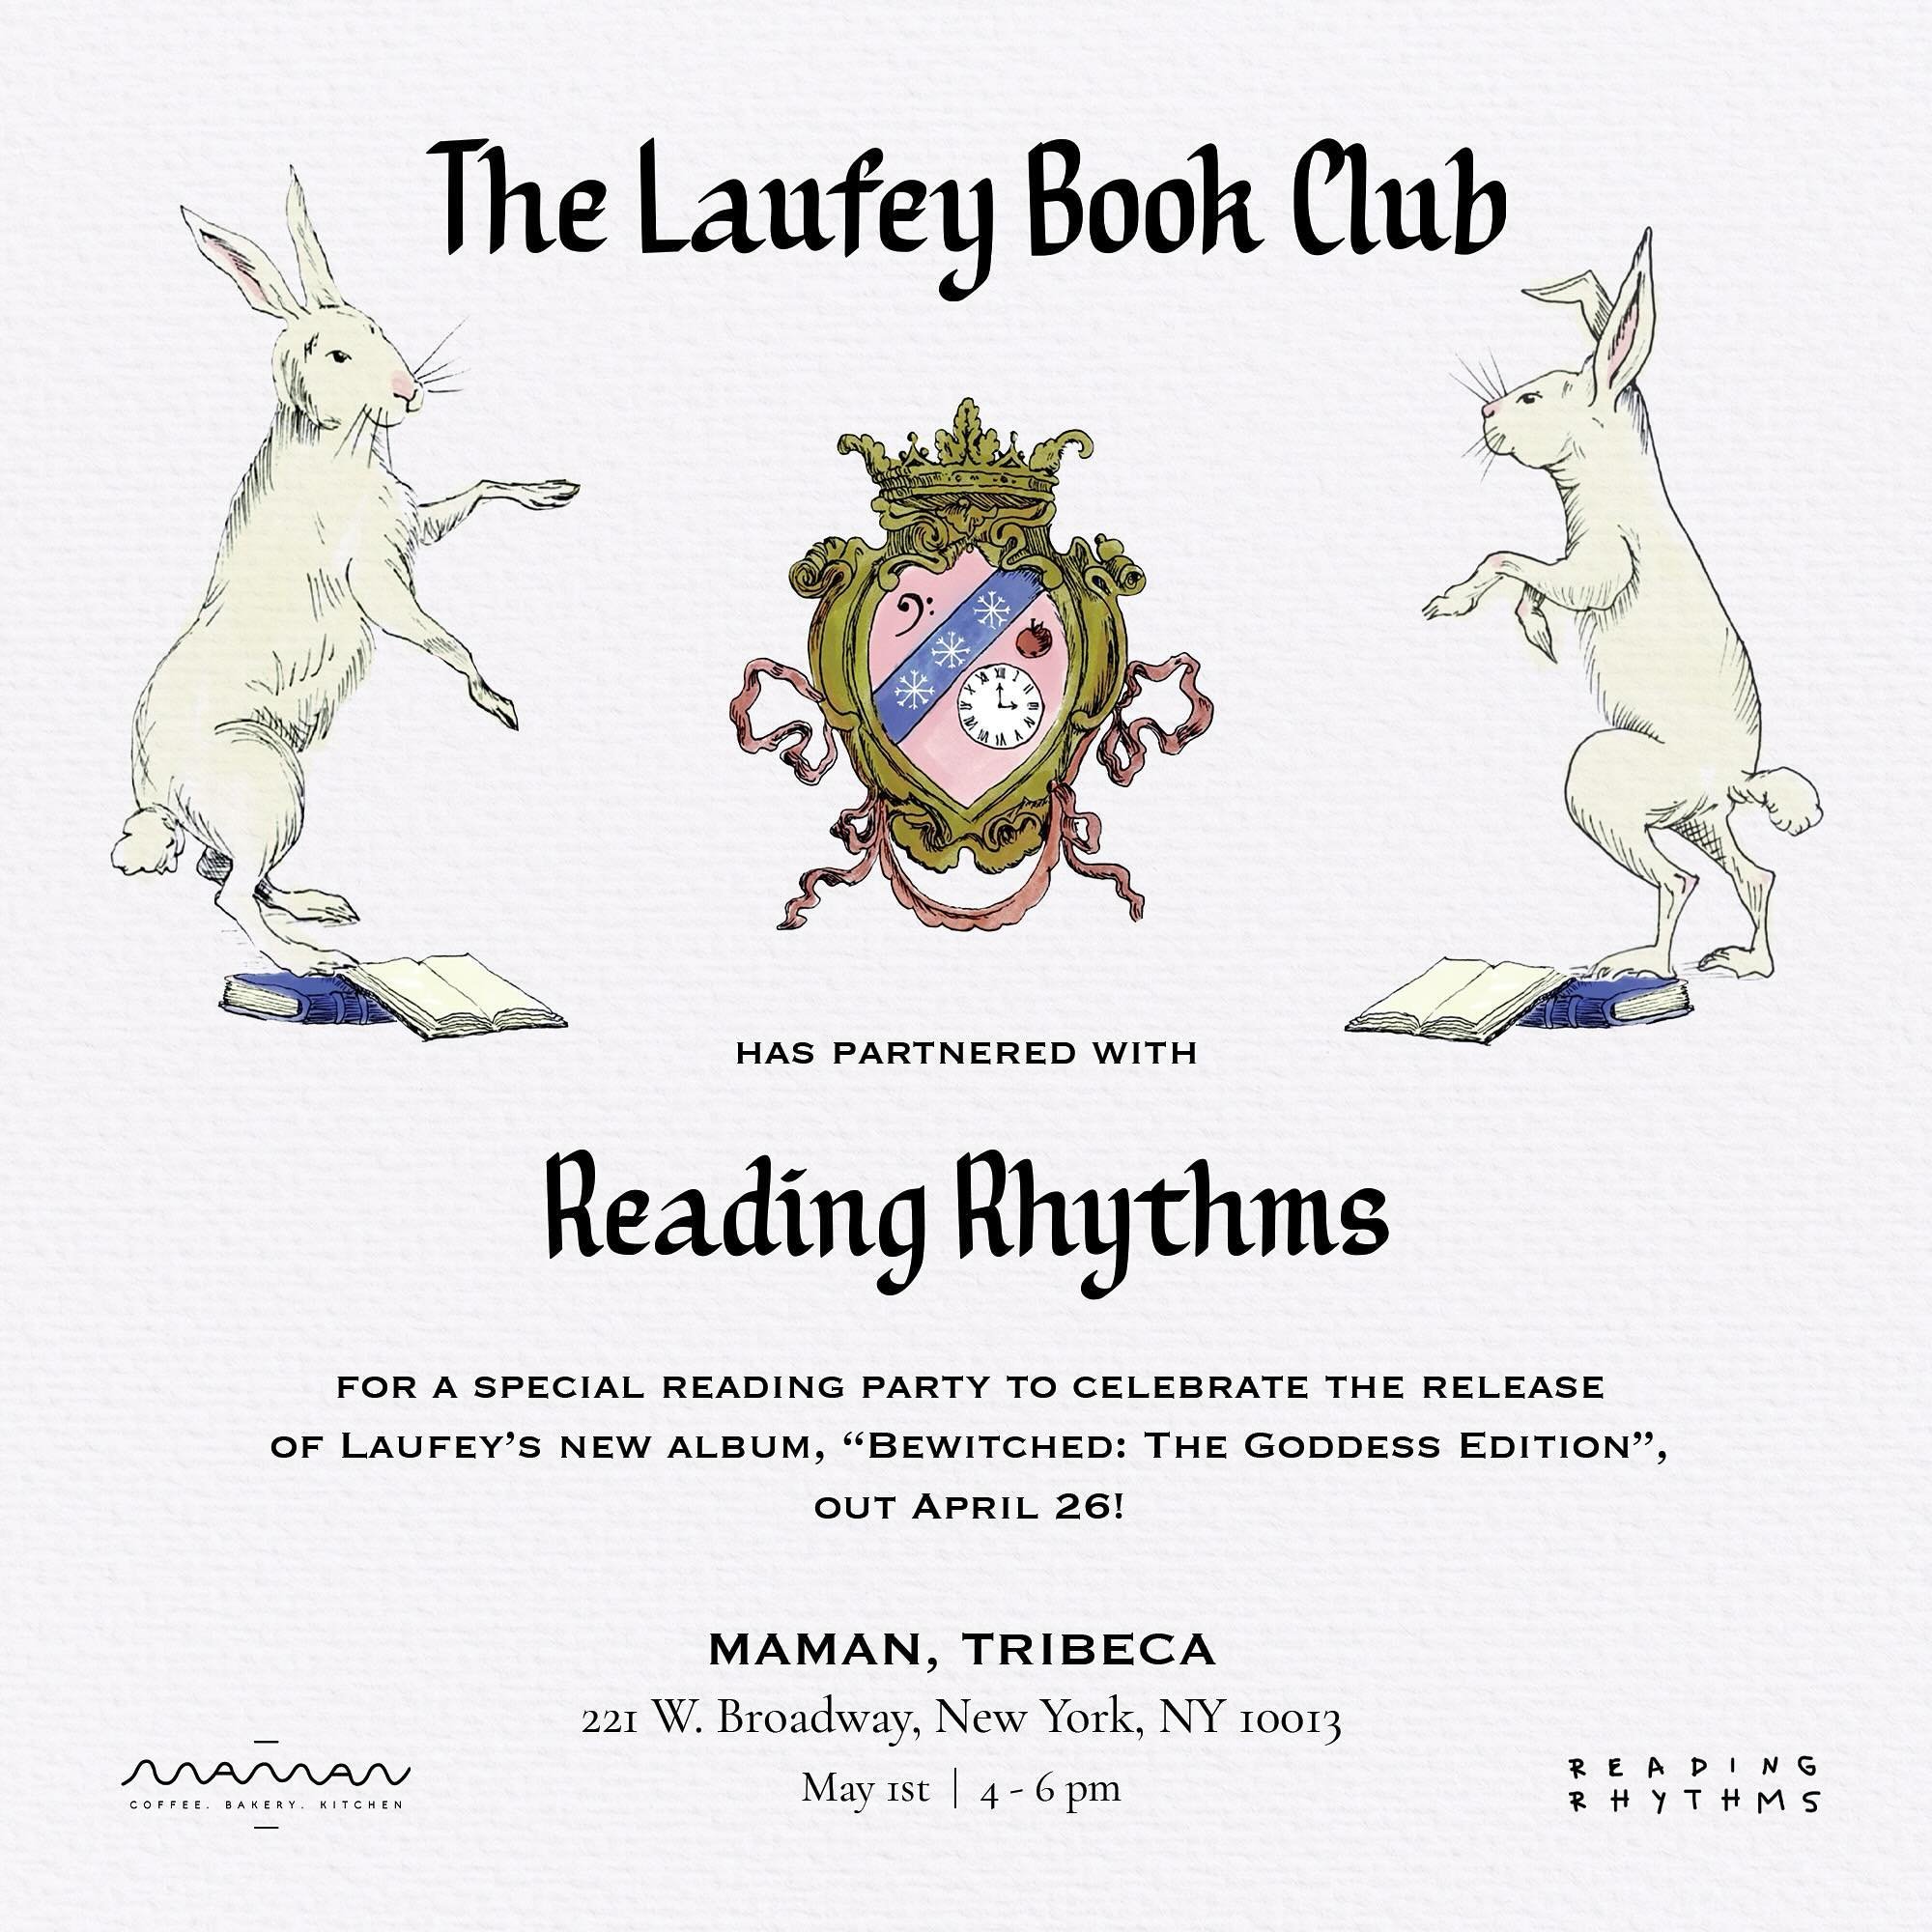 NYC lauvers! We are over the moon to announce the first Laufey Book Club reading party in partnership with @reading_rhythms to celebrate the upcoming release of &ldquo;Bewitched: The Goddess Edition&rdquo;. It will take place at the Tribeca @_mamanny